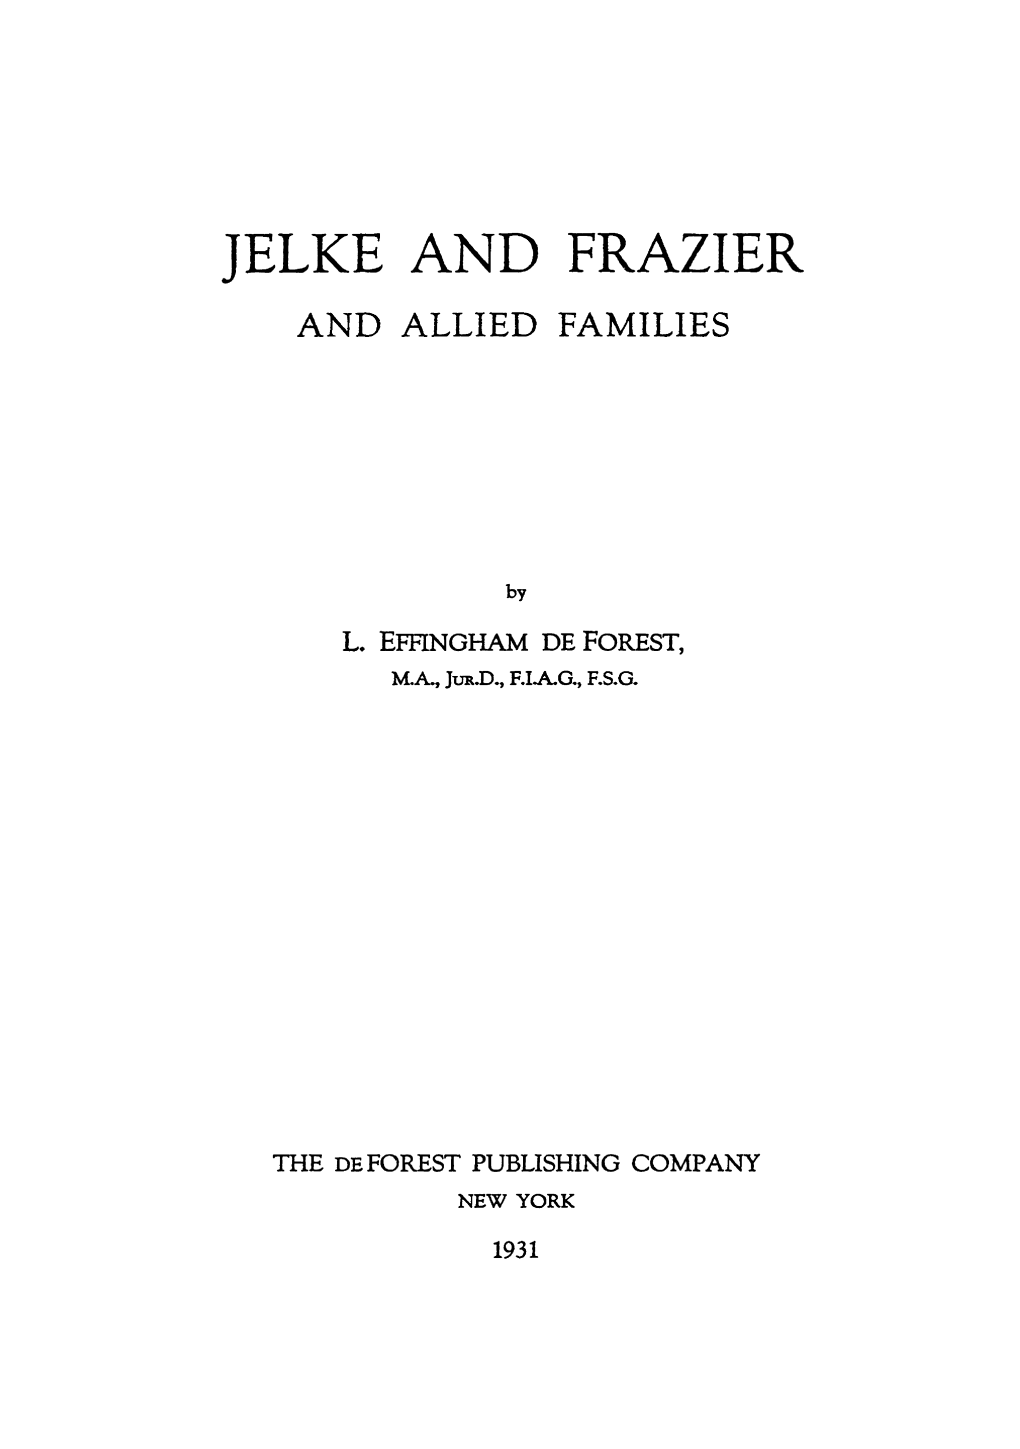 Jelke and Frazier and Allied Families